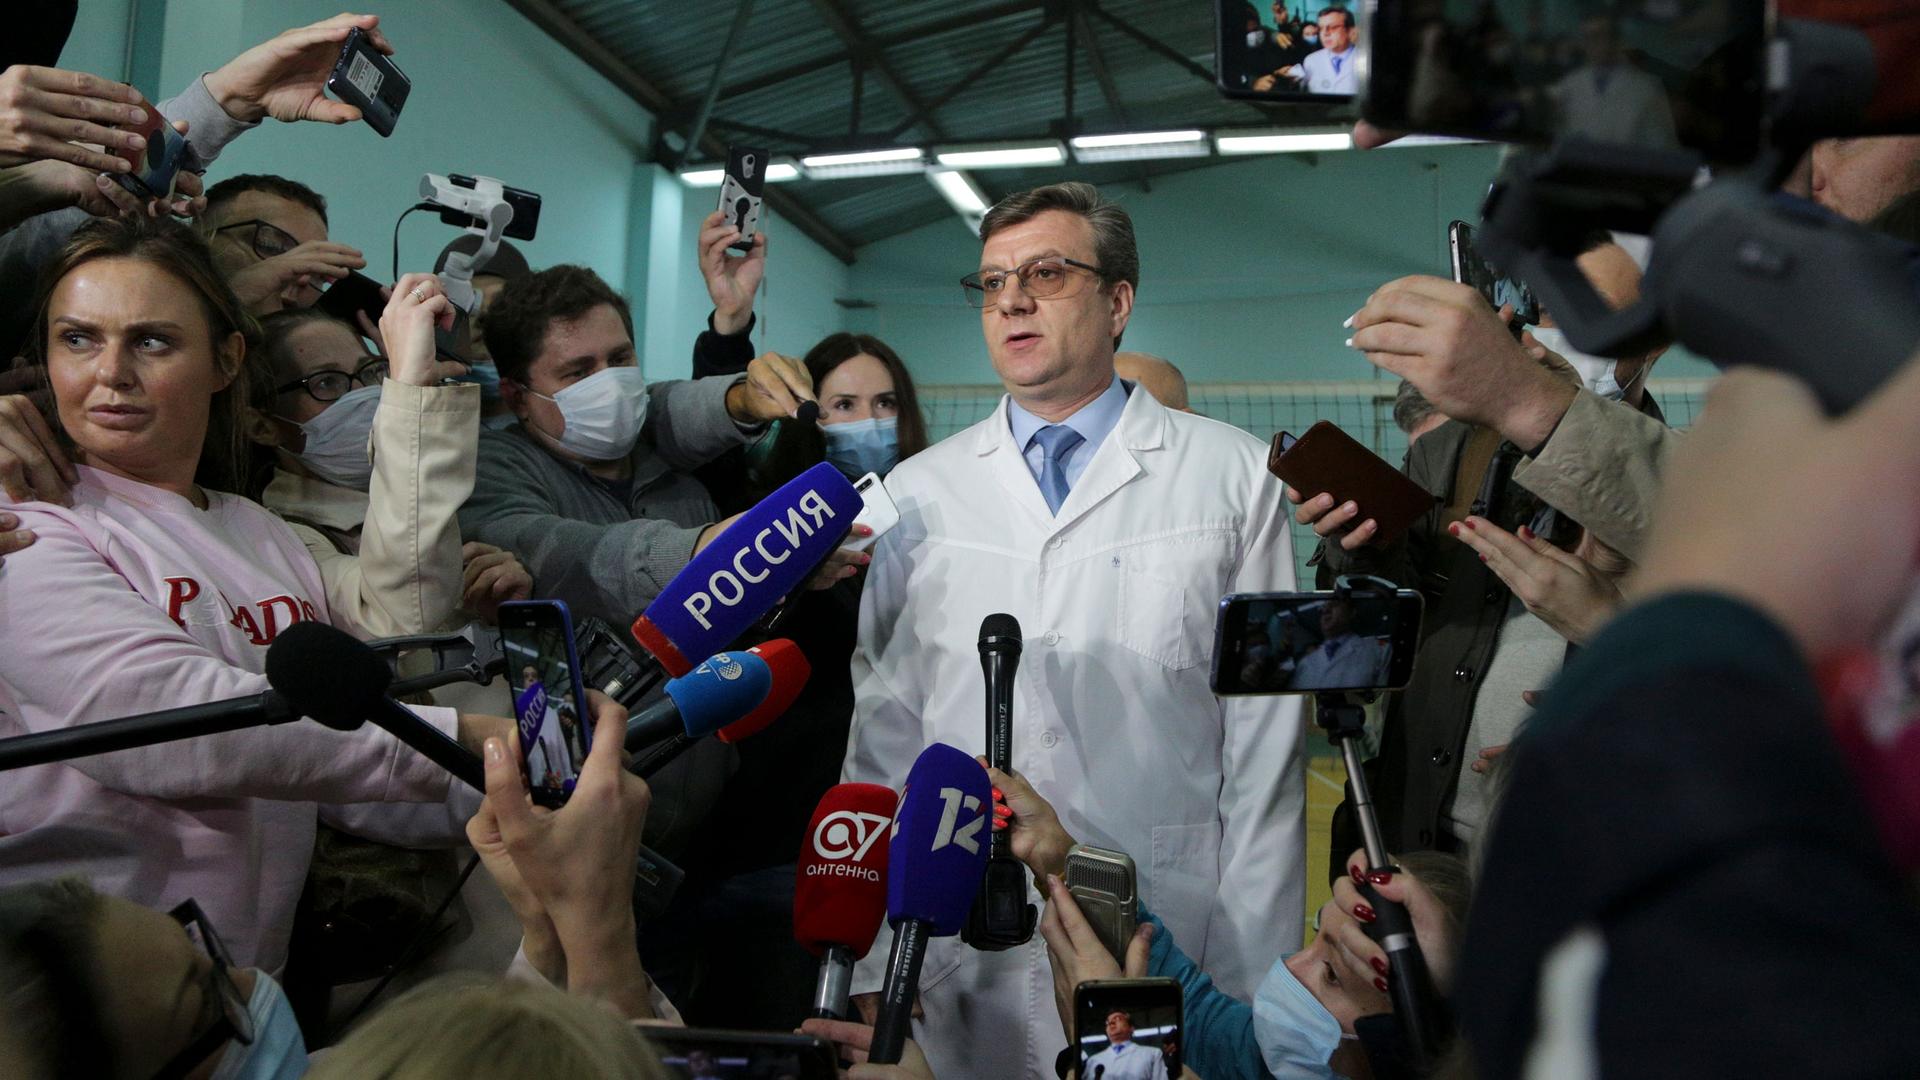 Chief physician Alexander Murakhovsky is shown wearing a white lab coat and tie while surrounded by members of the media.